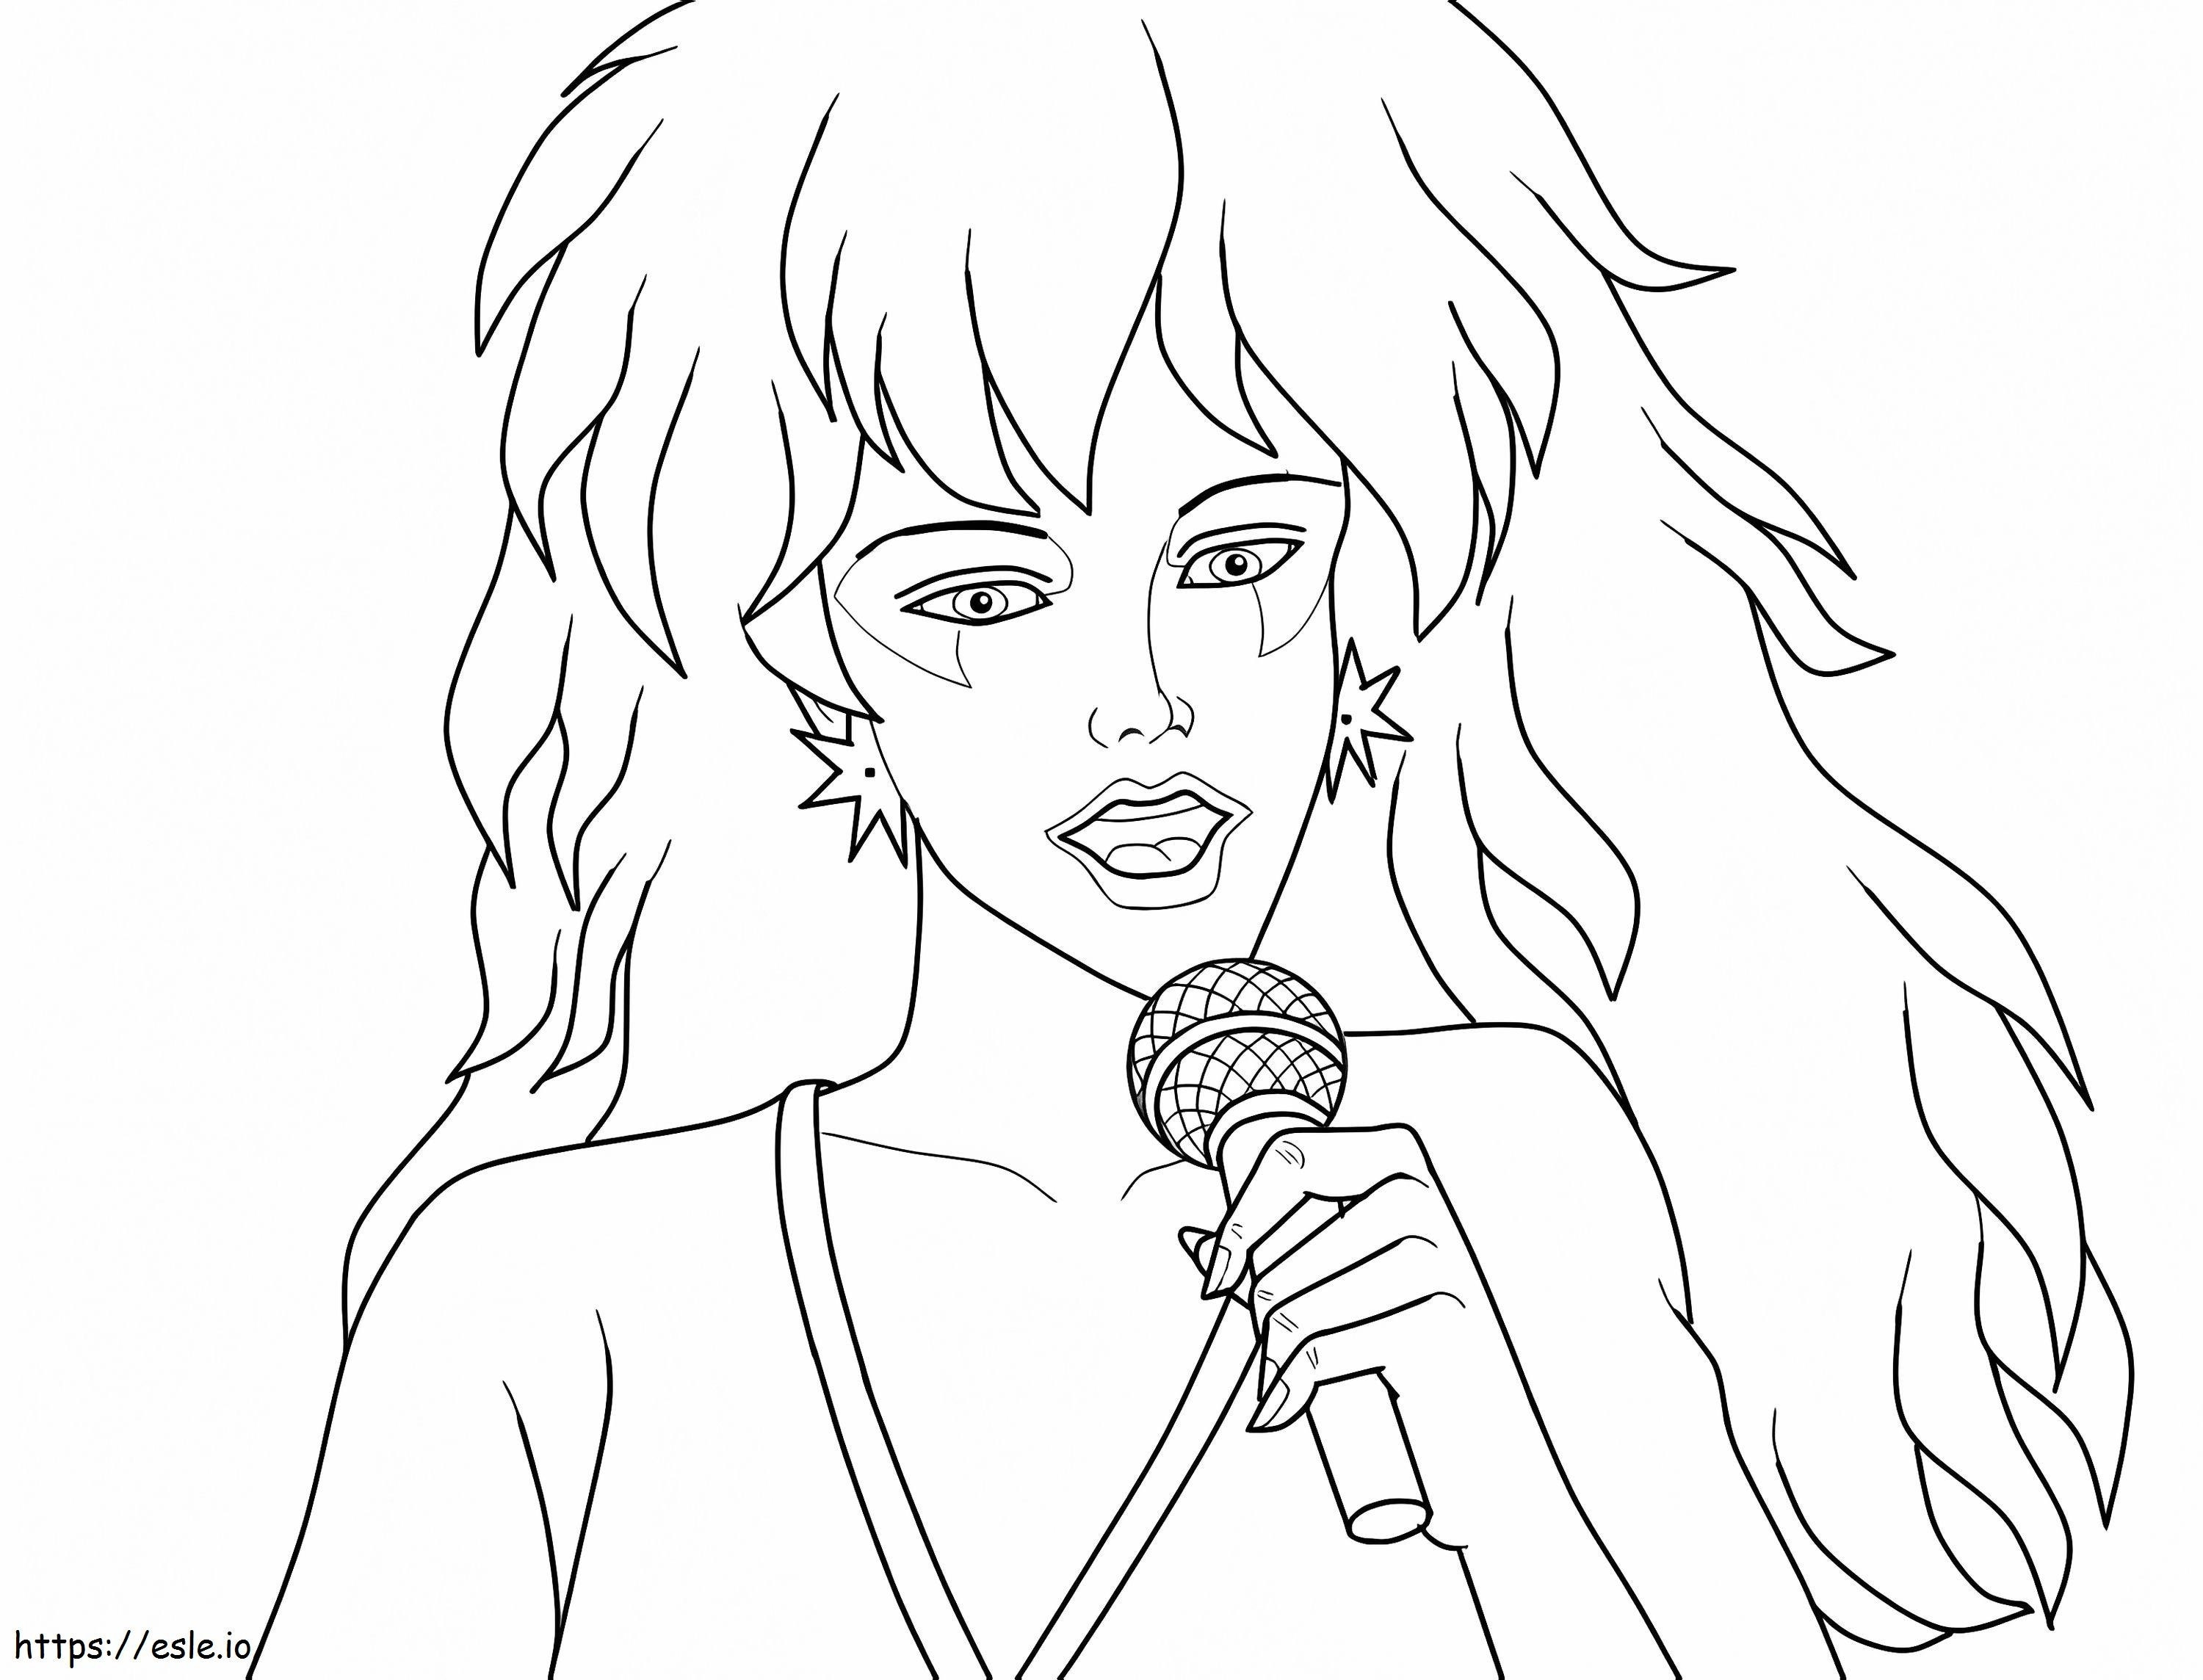 Jem And The Holograms 26 coloring page